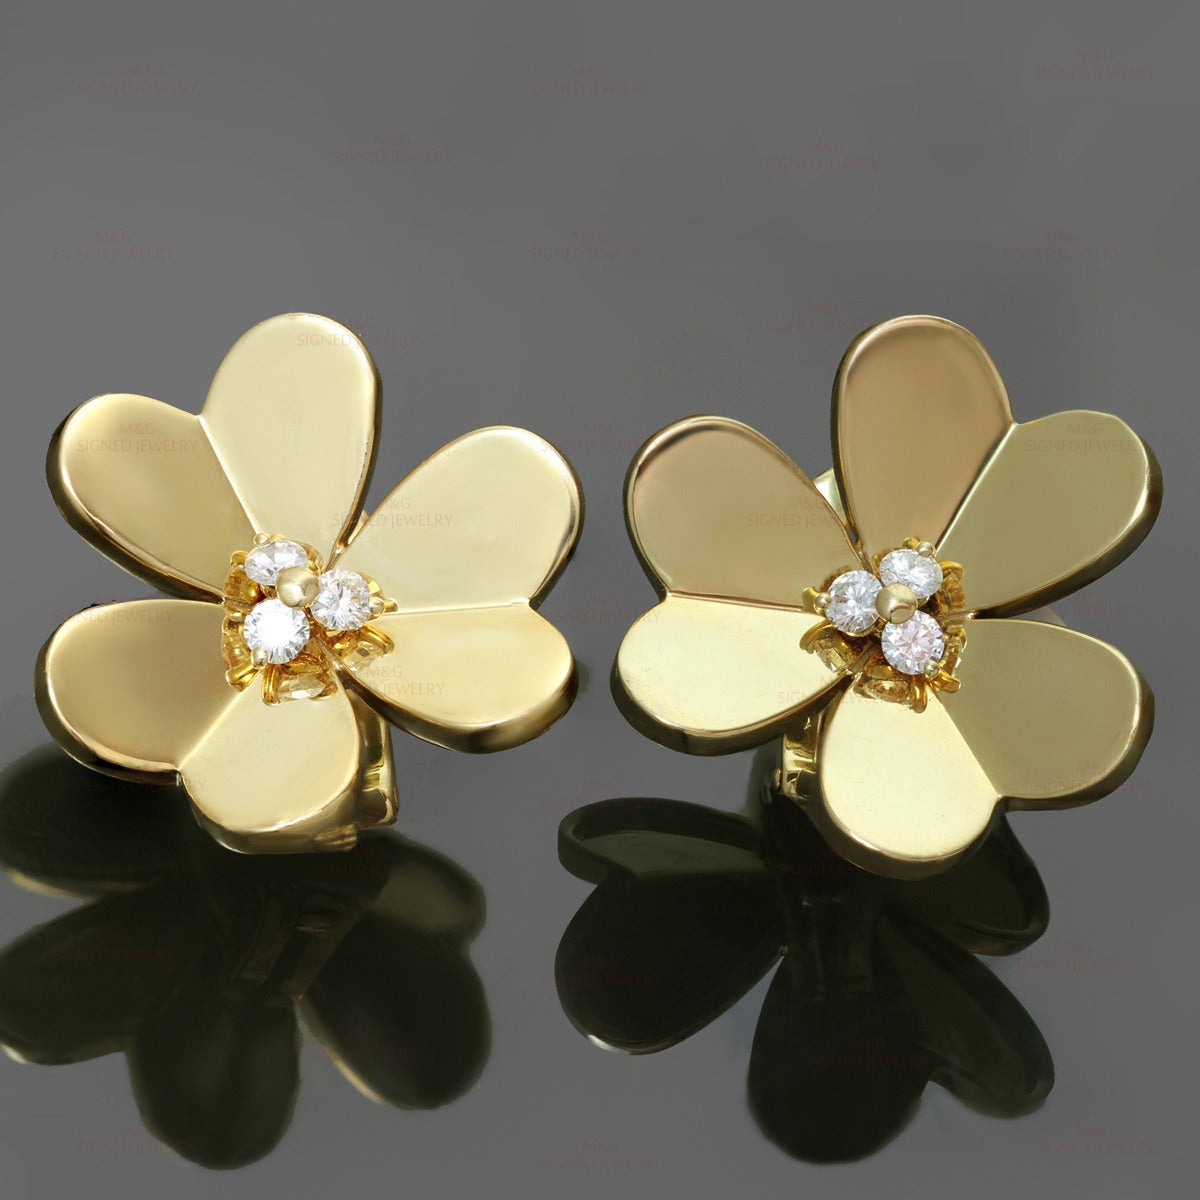 These fabulous Van Cleef & Arpels earrings from the iconic Frivole collection are made in 18k yellow gold and feature a flower design set with 6 brilliant-cut round E-F VVS1-VVS2 diamonds of an estimated 0.35 carats. Made in France circa 1990s.